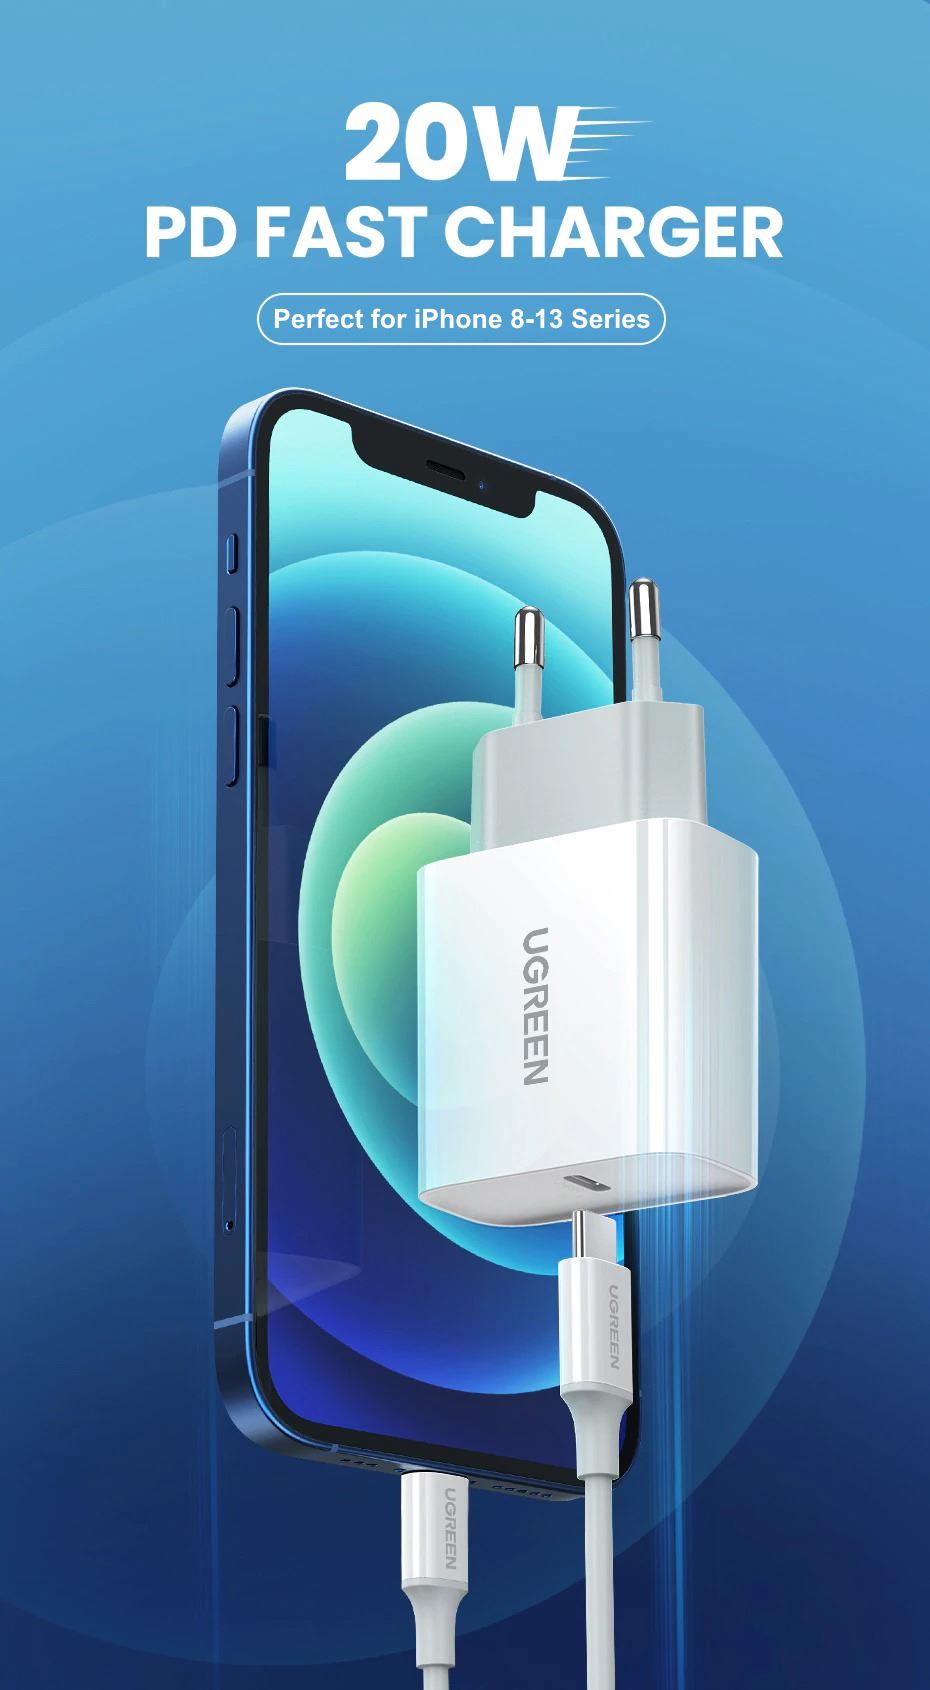 ugreen 20w power delivery 3.0 quick charge 4.0+ fast charging usb type-c wall charger